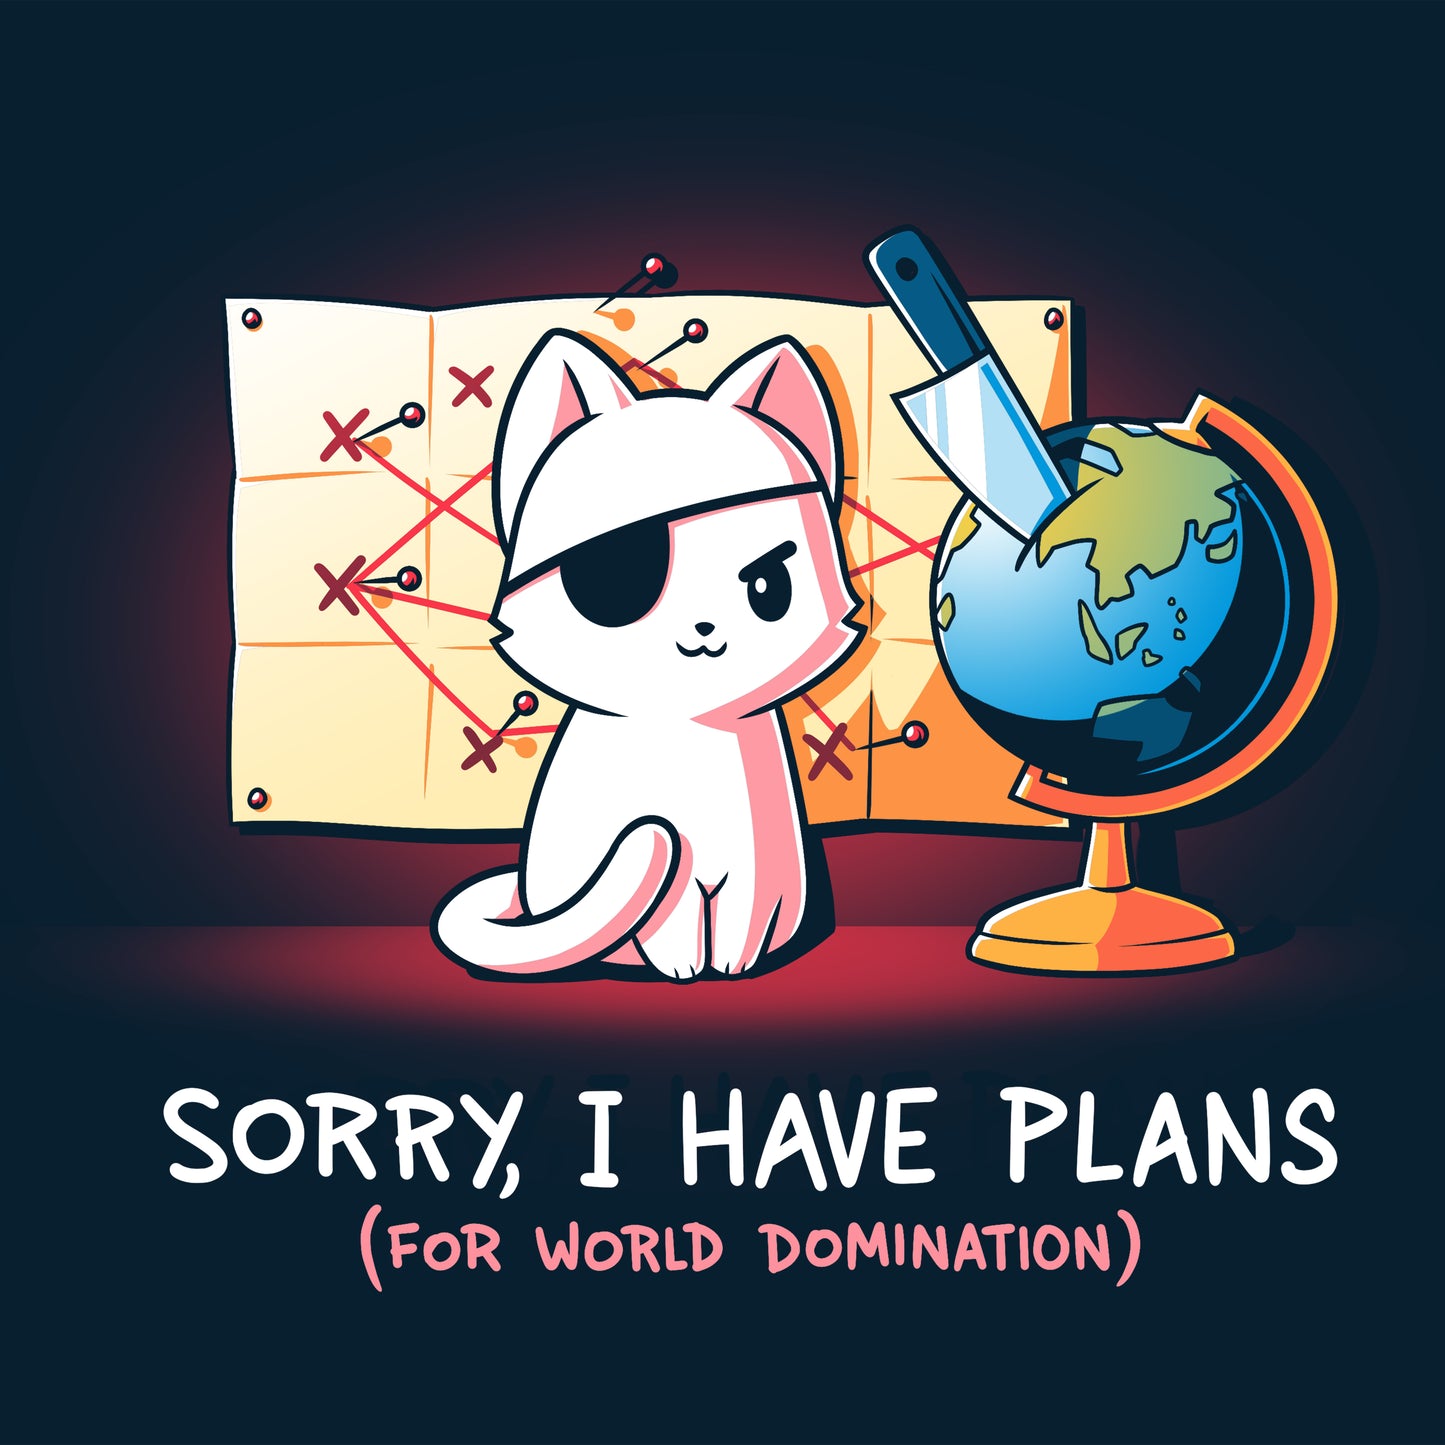 Sorry, my navy blue TeeTurtle t-shirt inspires world dominion aspirations.